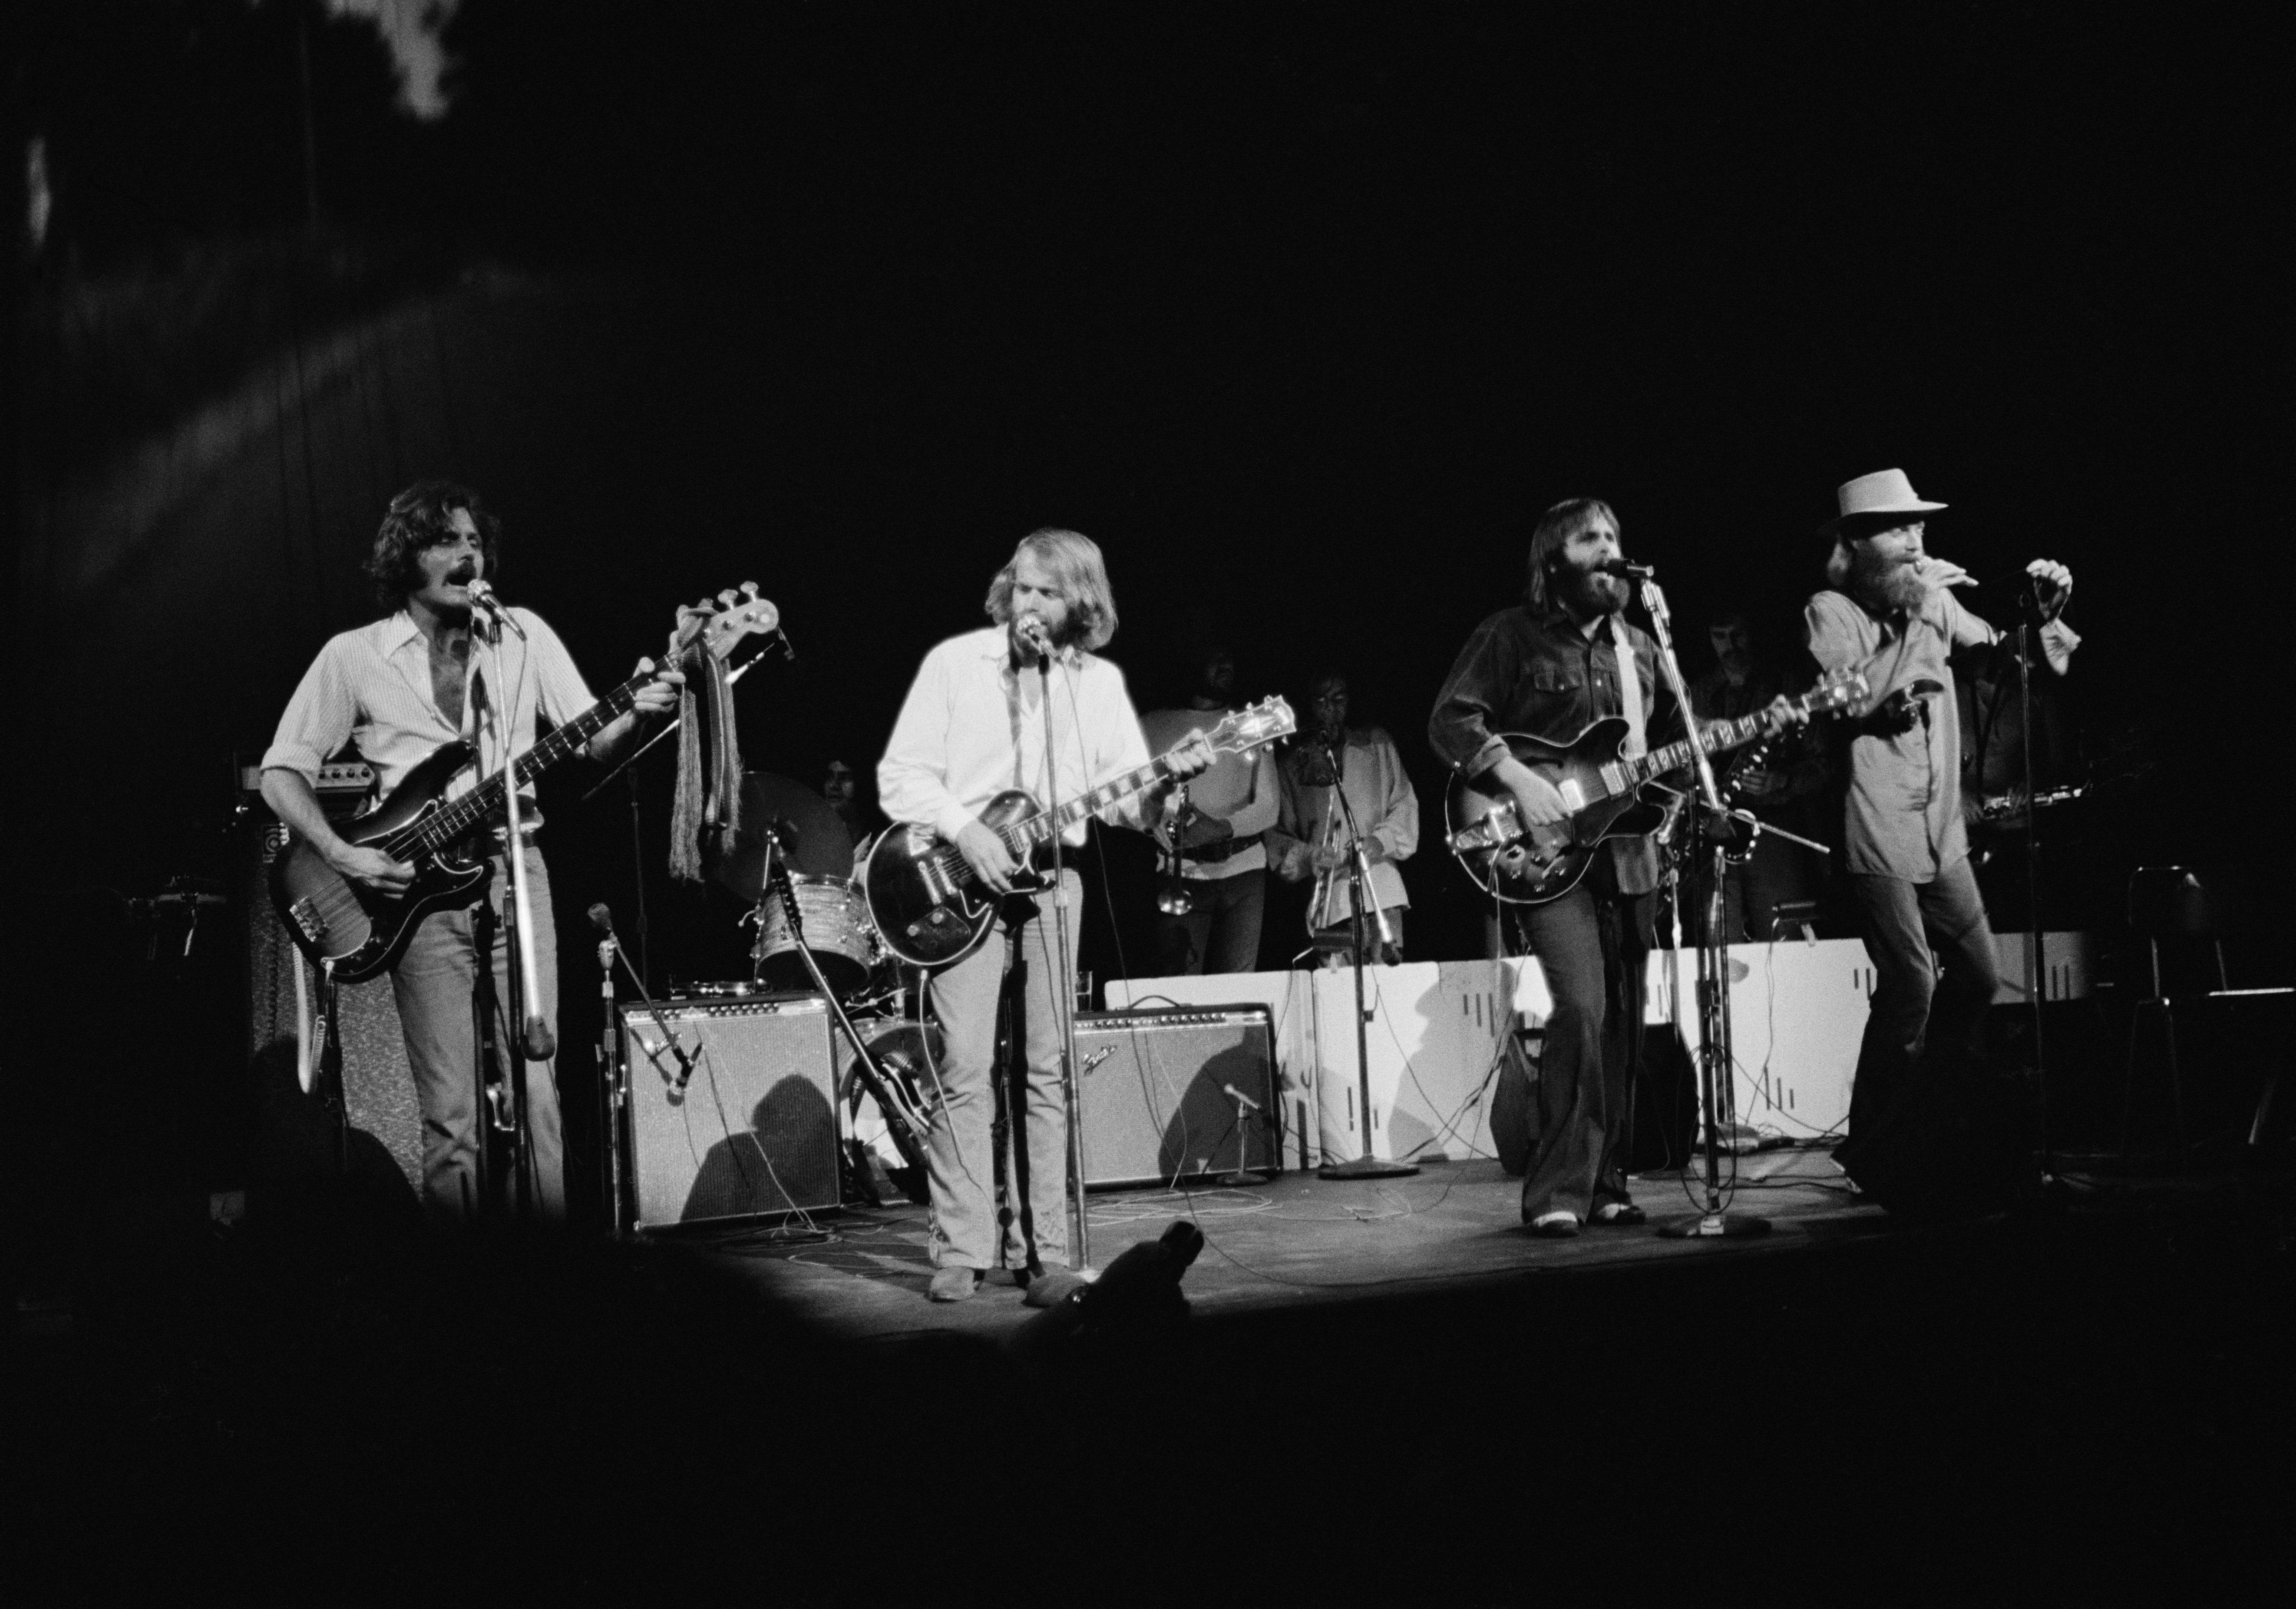 The band performing at the Fillmore East in New York in 1971